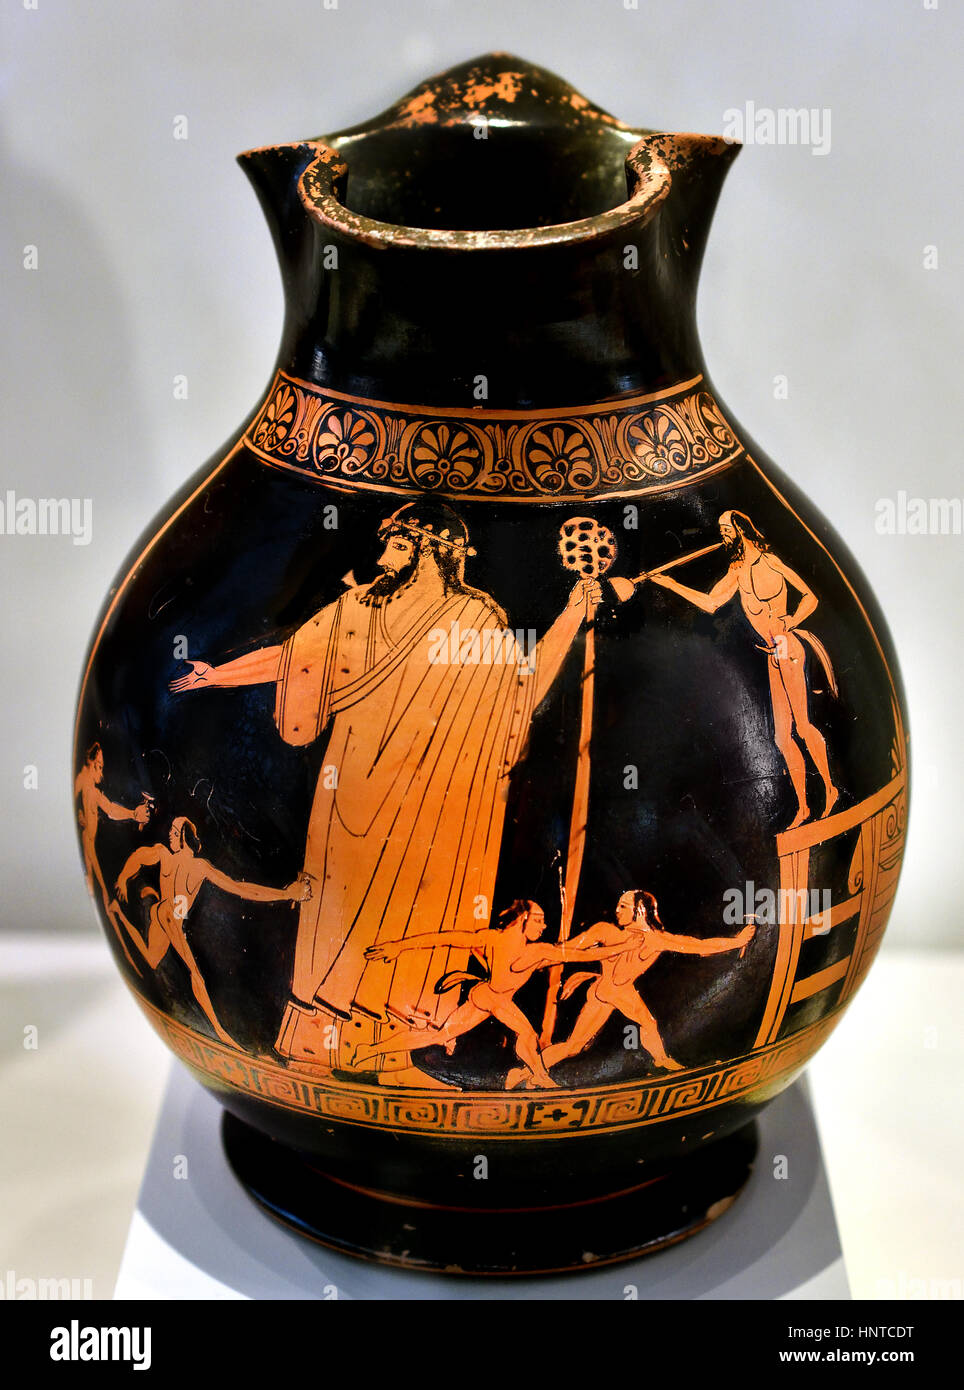 Satyr Play - Torch Race of Young Satyrs around Dionysus  460 BC Attic  (wine jug and a key form of ancient Greek pottery ) Greek, Greece. Stock Photo